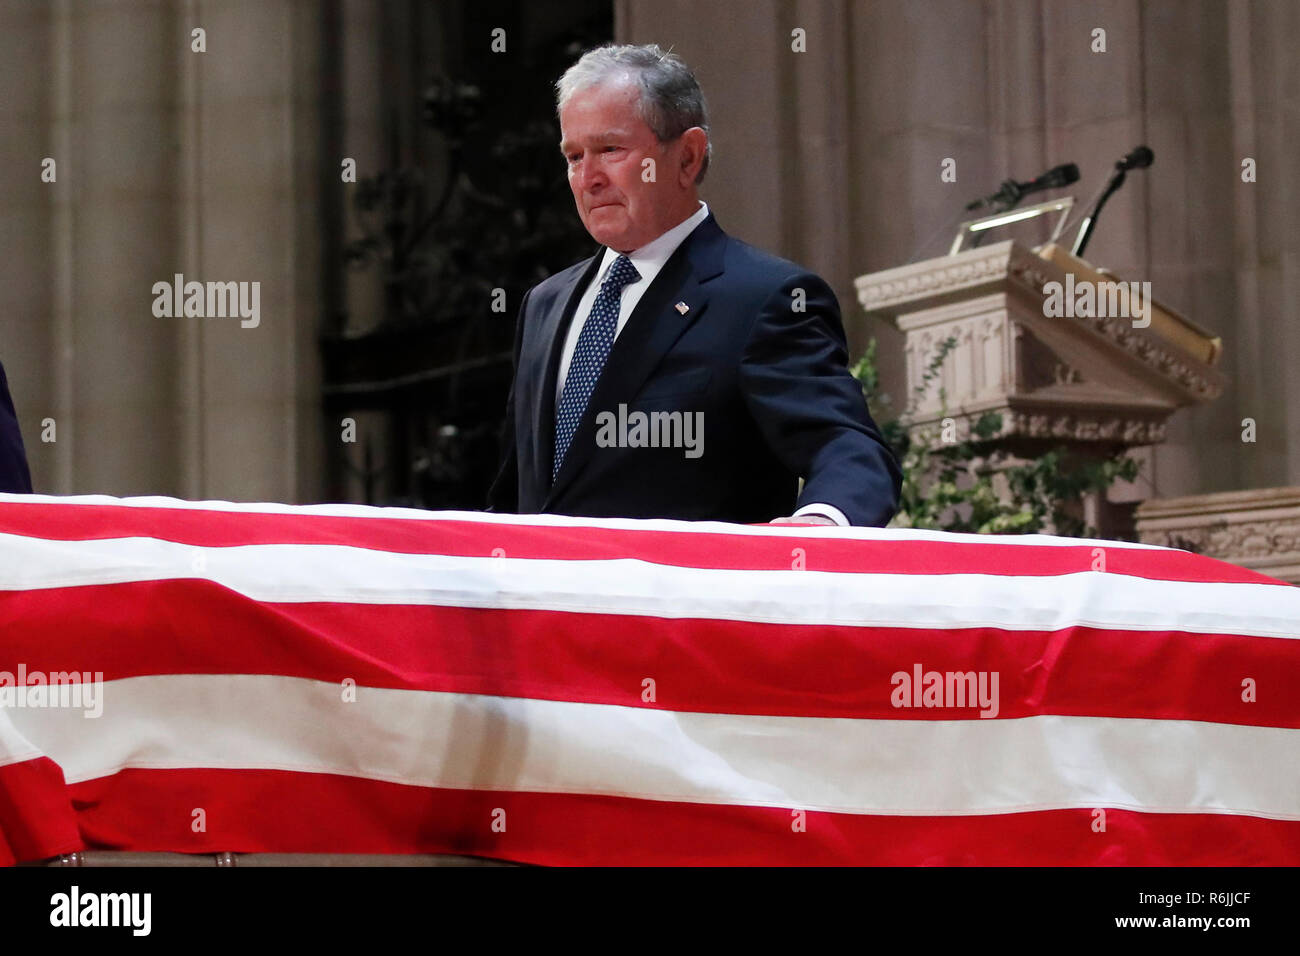 Washington. 5th Dec, 2018. Former President George W. Bush touches the casket of his father, former President George H.W. Bush, at the State Funeral at the National Cathedral, Wednesday, Dec. 5, 2018, in Washington. Credit: Alex Brandon/Pool via CNP | usage worldwide Credit: dpa/Alamy Live News Stock Photo